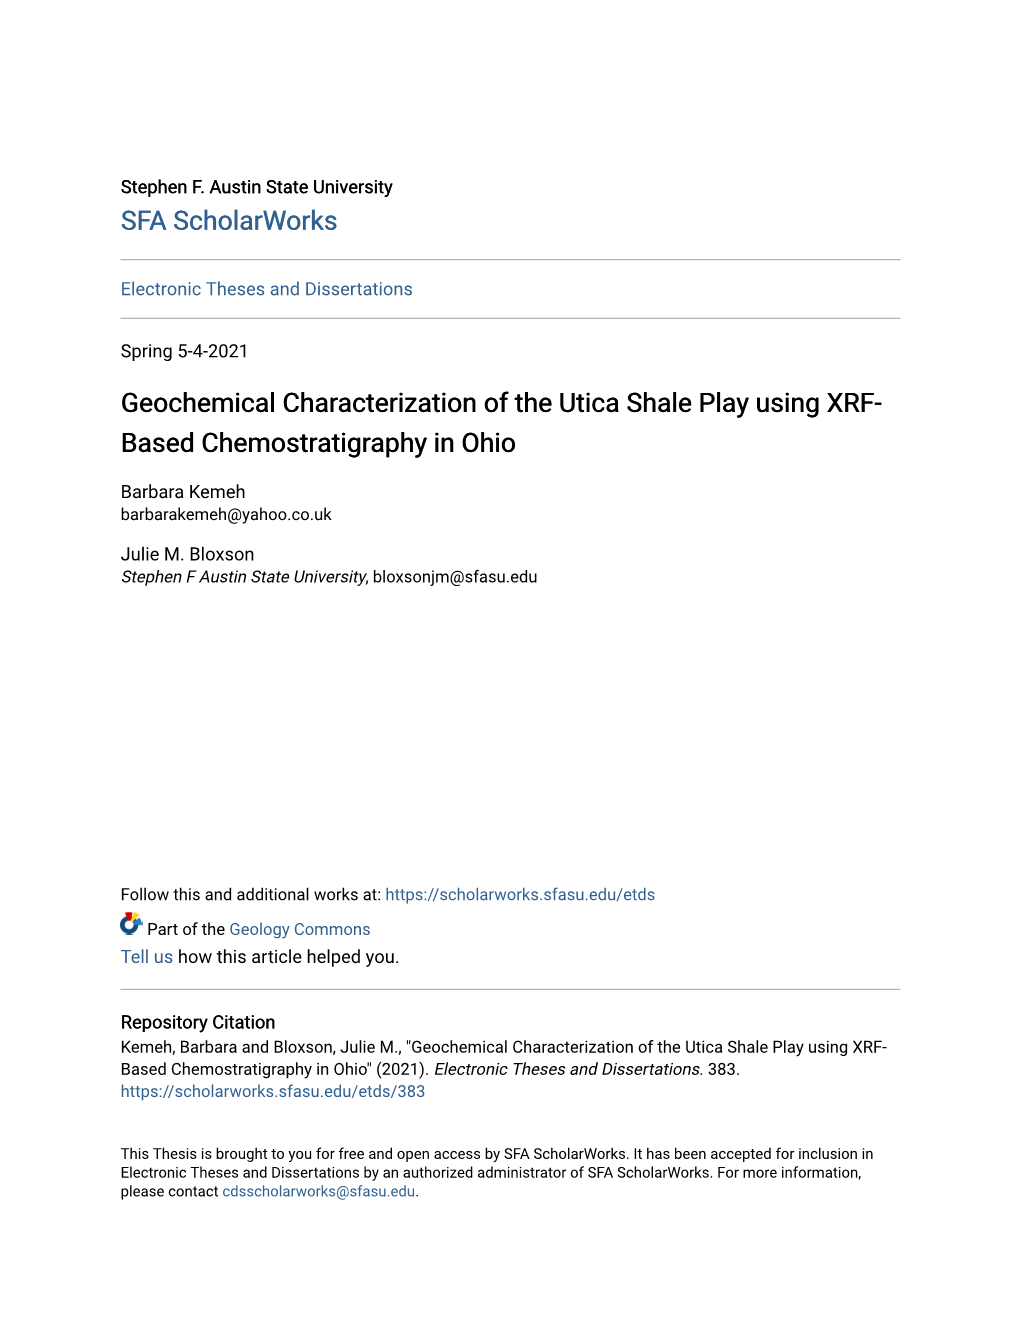 Geochemical Characterization of the Utica Shale Play Using XRF-Based Chemostratigraphy in Ohio